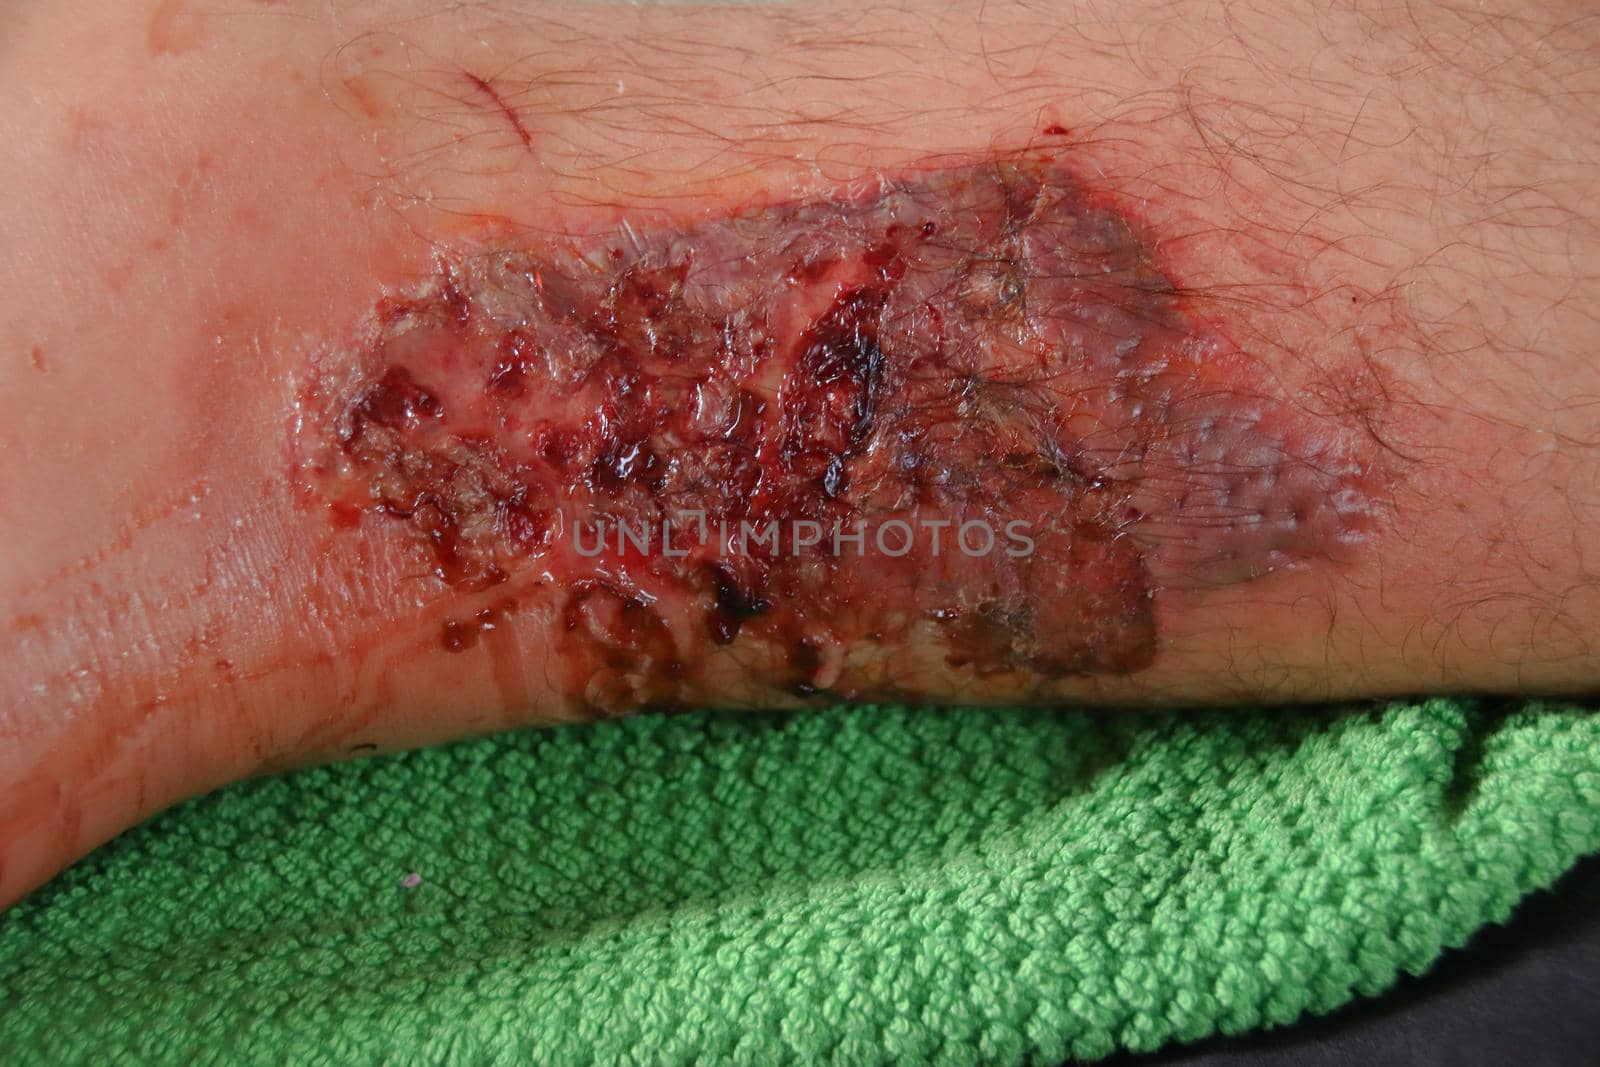 A third-degree burn on the leg of a Caucasian male against black background